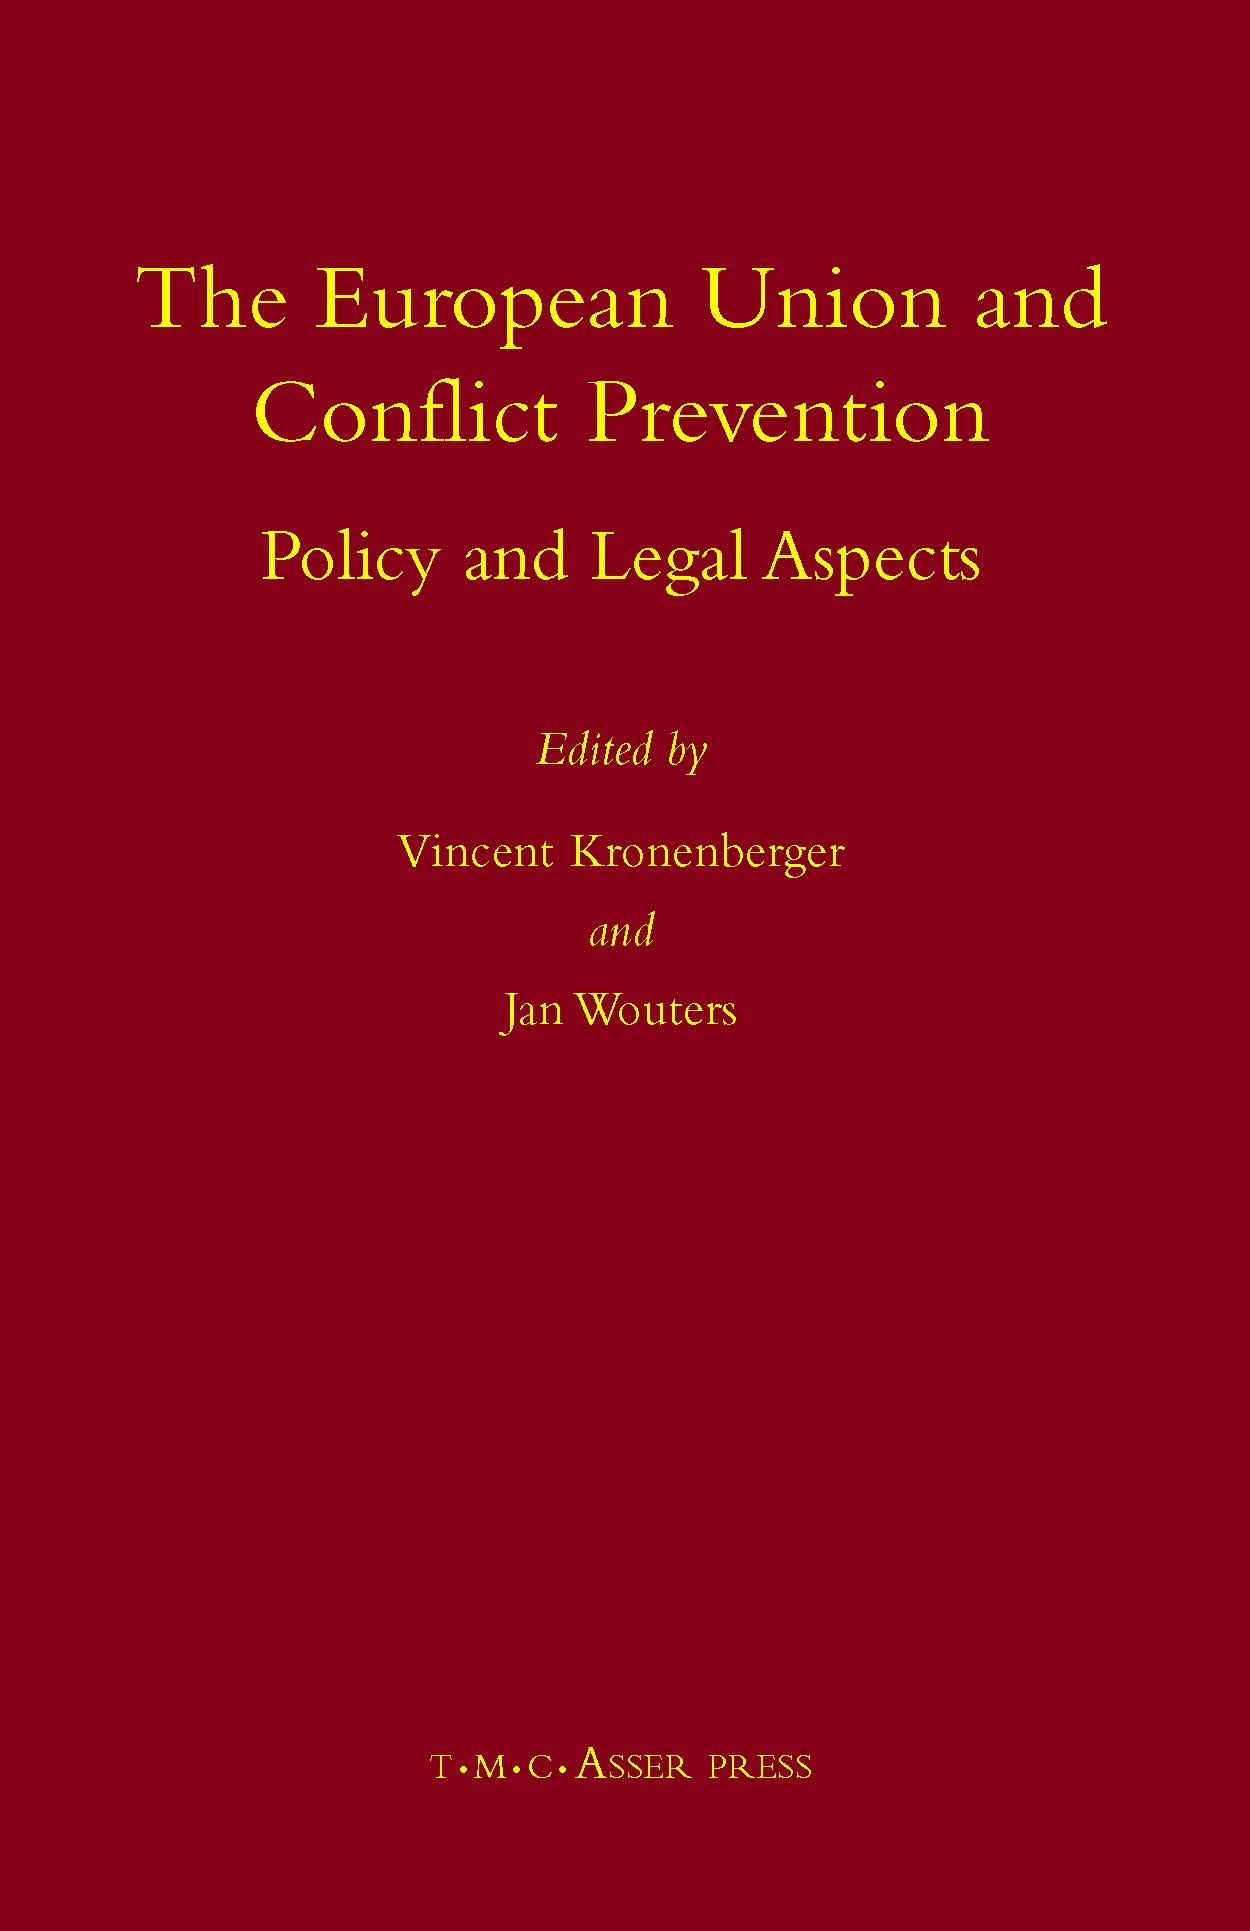 The European Union and Conflict Prevention - Policy and Legal Aspects